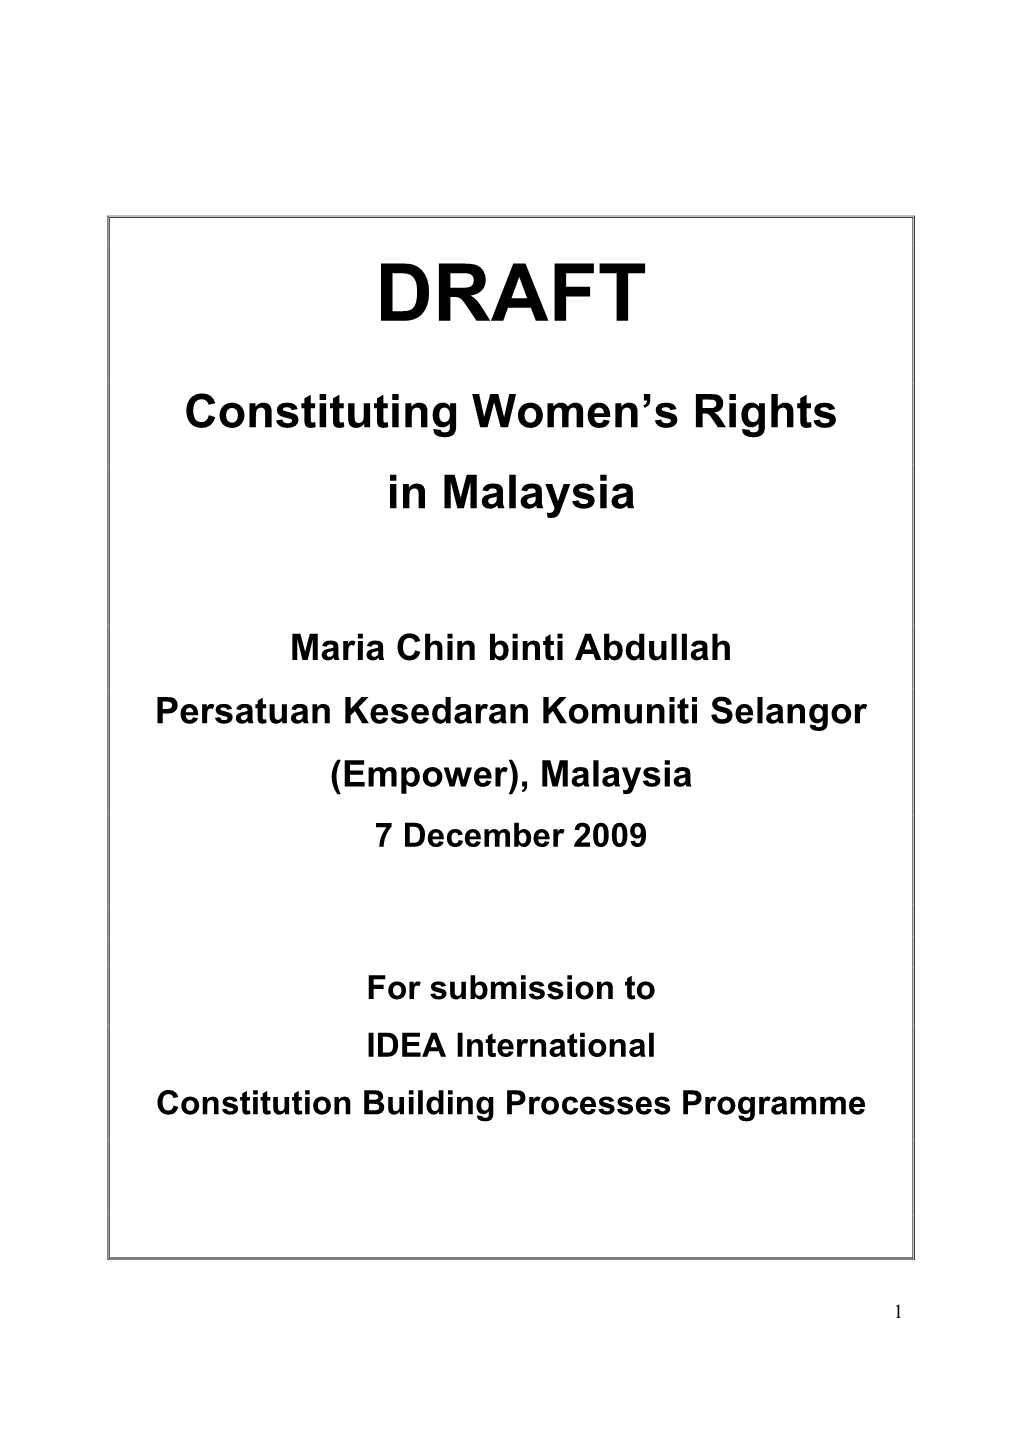 Constituting Women's Rights in Malaysia